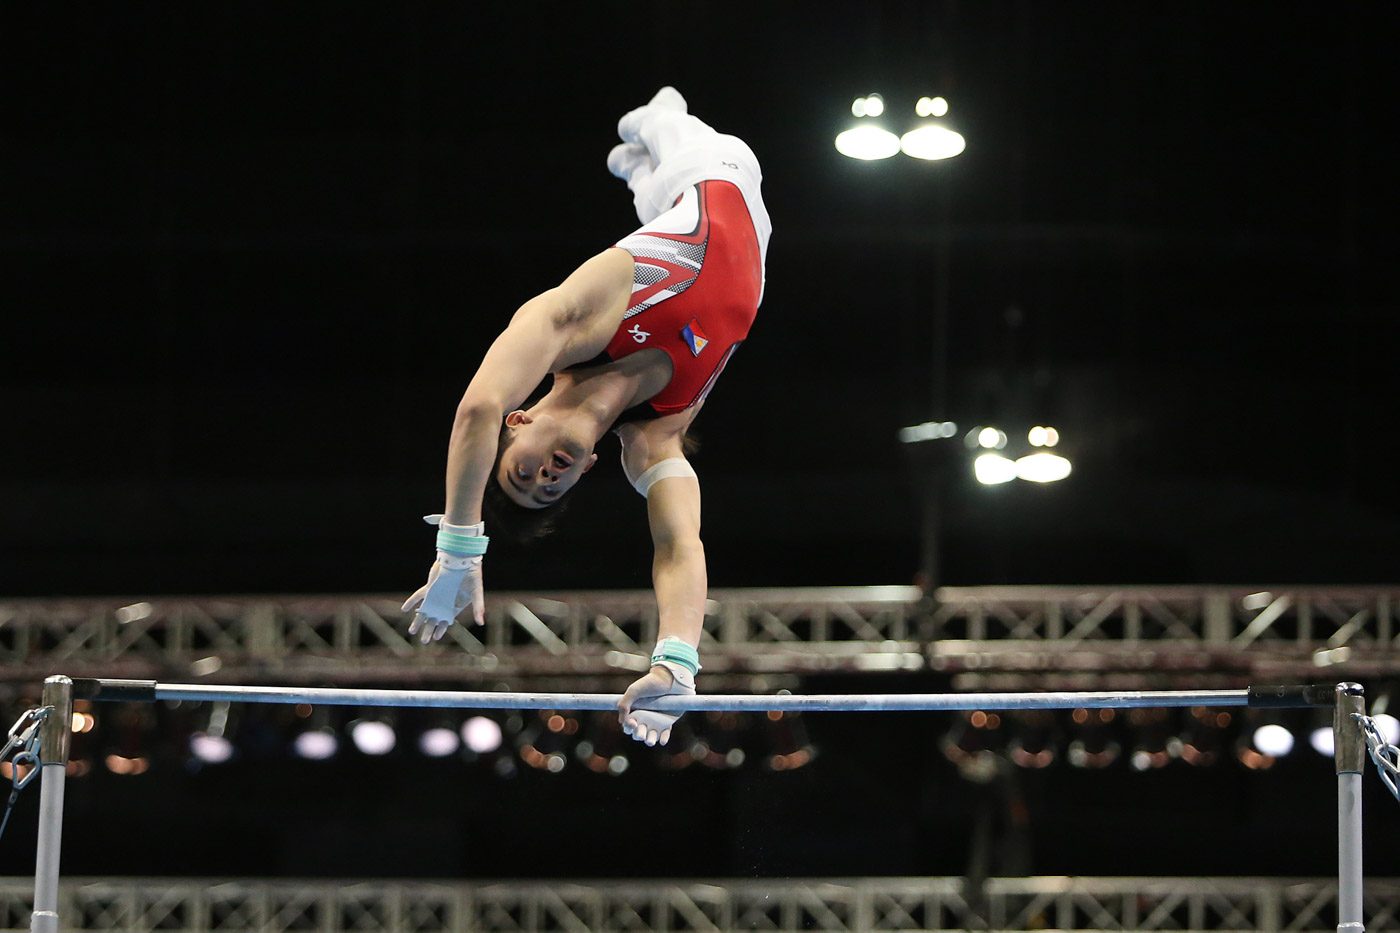 TOUGH BREAK. Gymnast Albert Lopez of the Philippines competes in the horizontal bars event but he then falls as he attempts a difficult move. He scored 11.150 to finish in last place. Photo by POC-PSC Media 